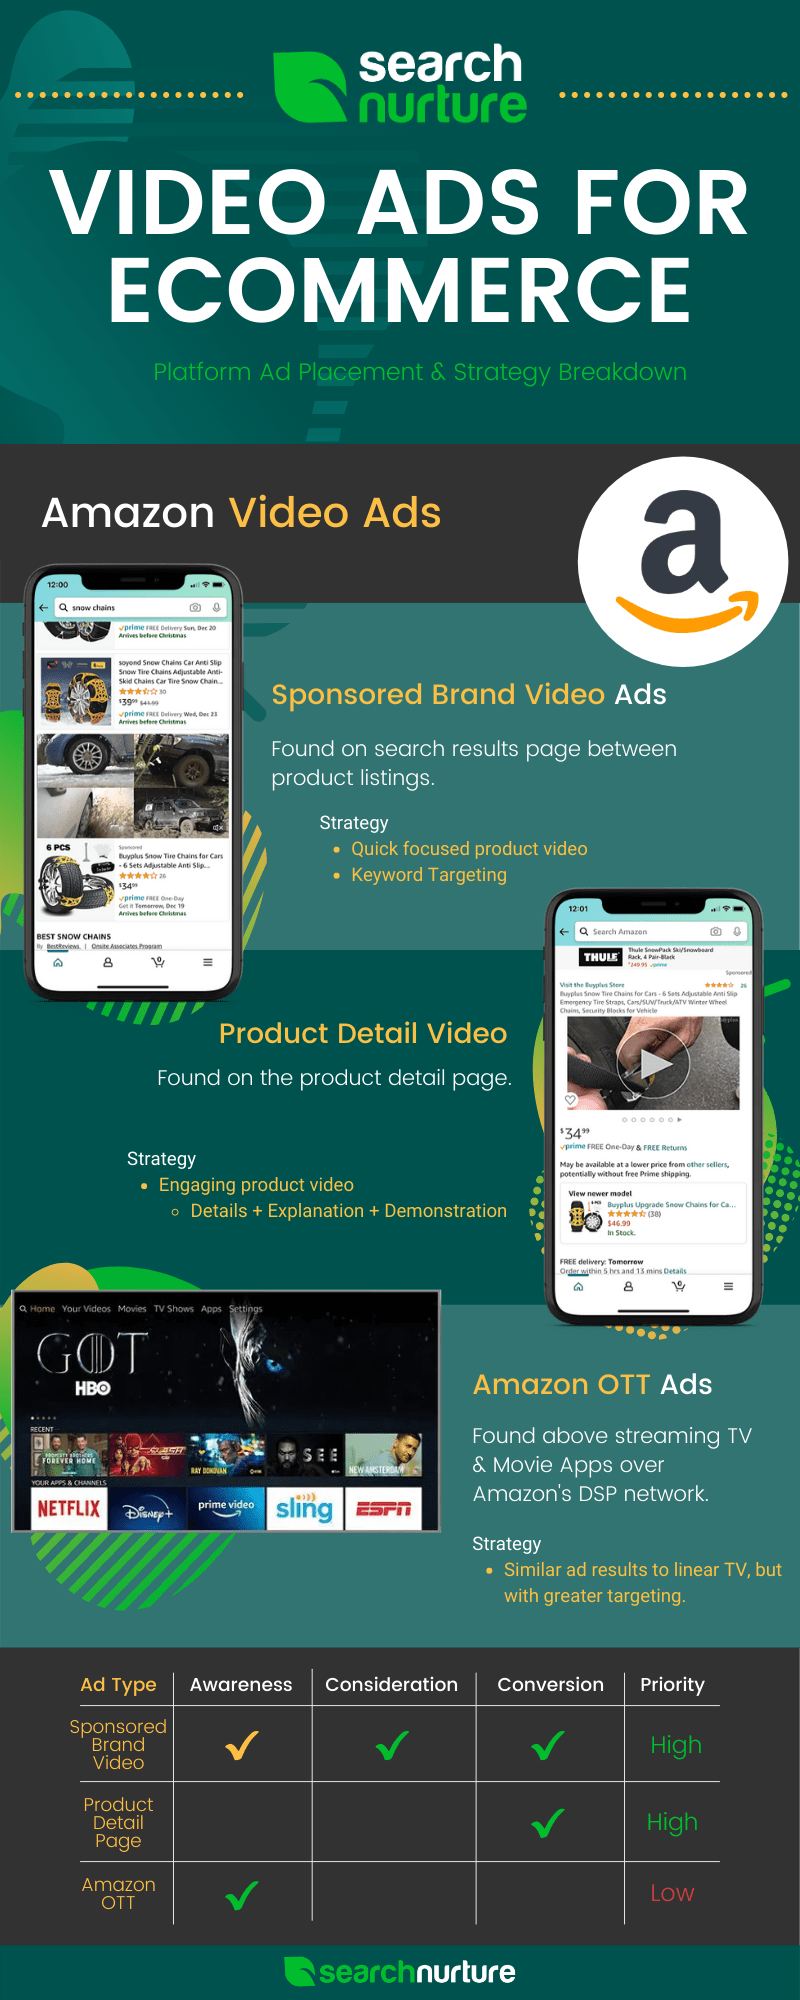 Learn about the different types of video ads for e-commerce offered by Amazon in part 1 of our infographic!